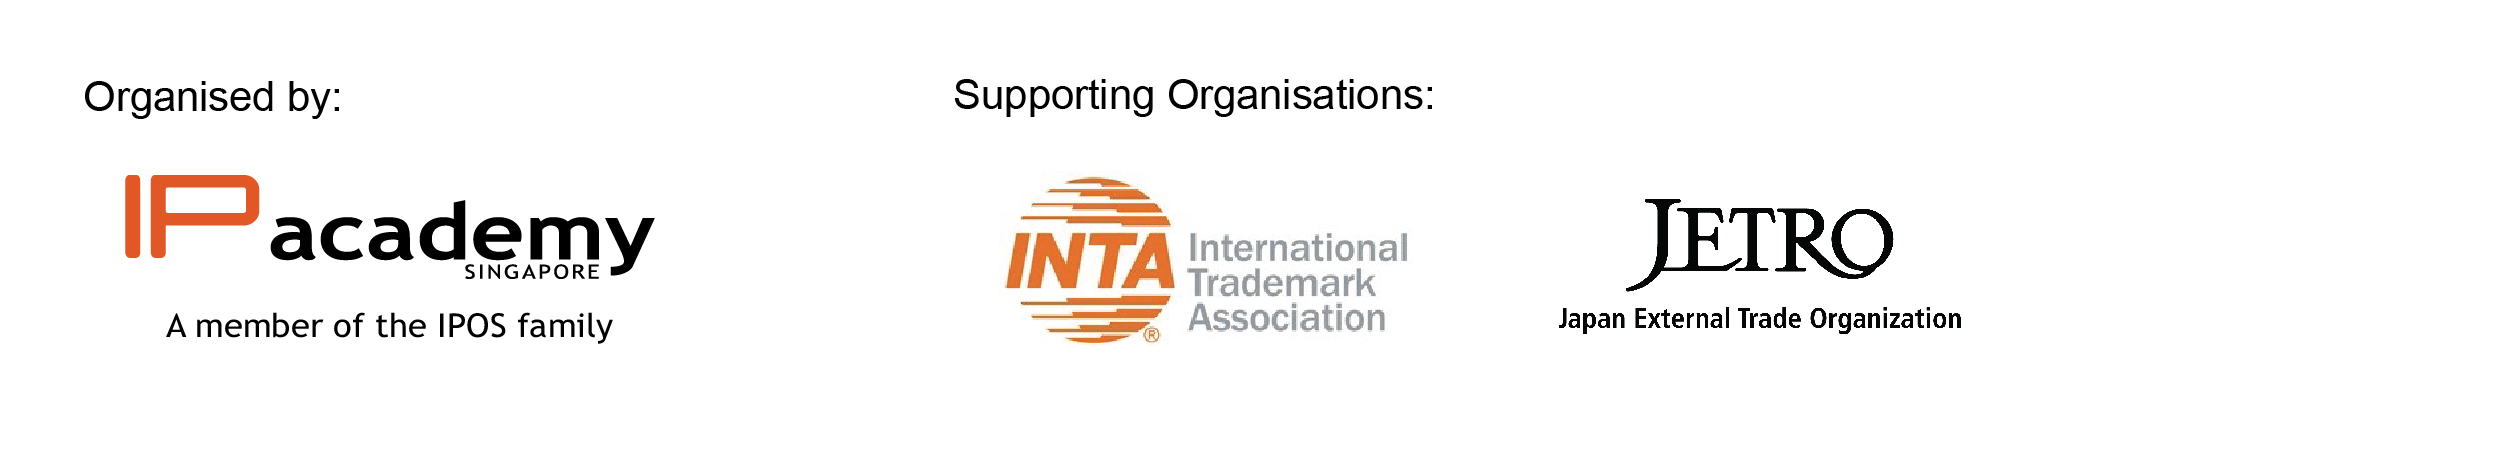 supporting orgs logos-01.jpg